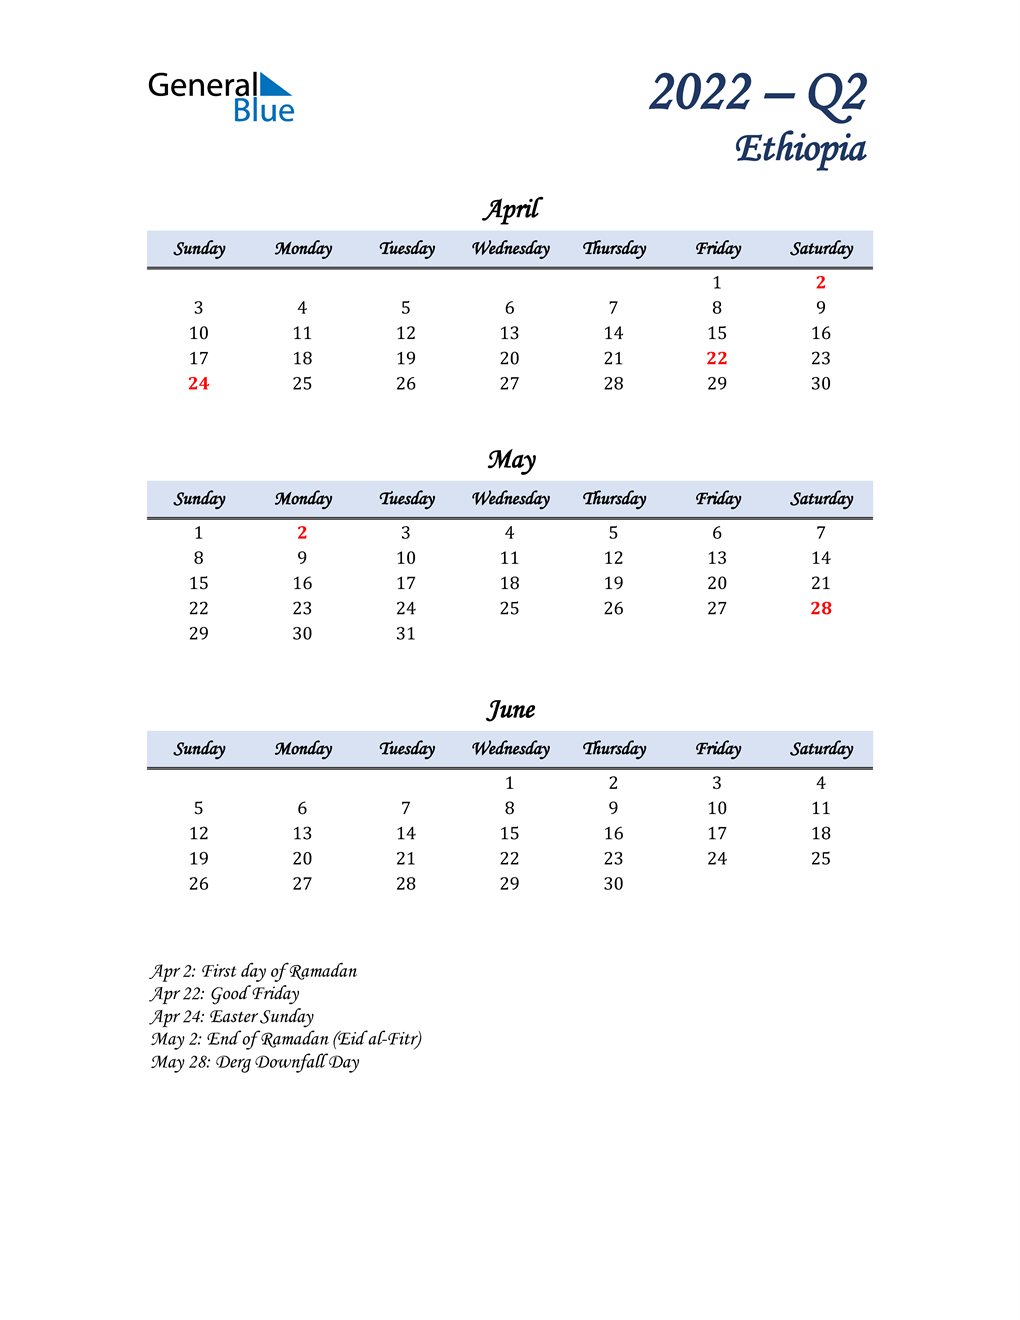  April, May, and June Calendar for Ethiopia